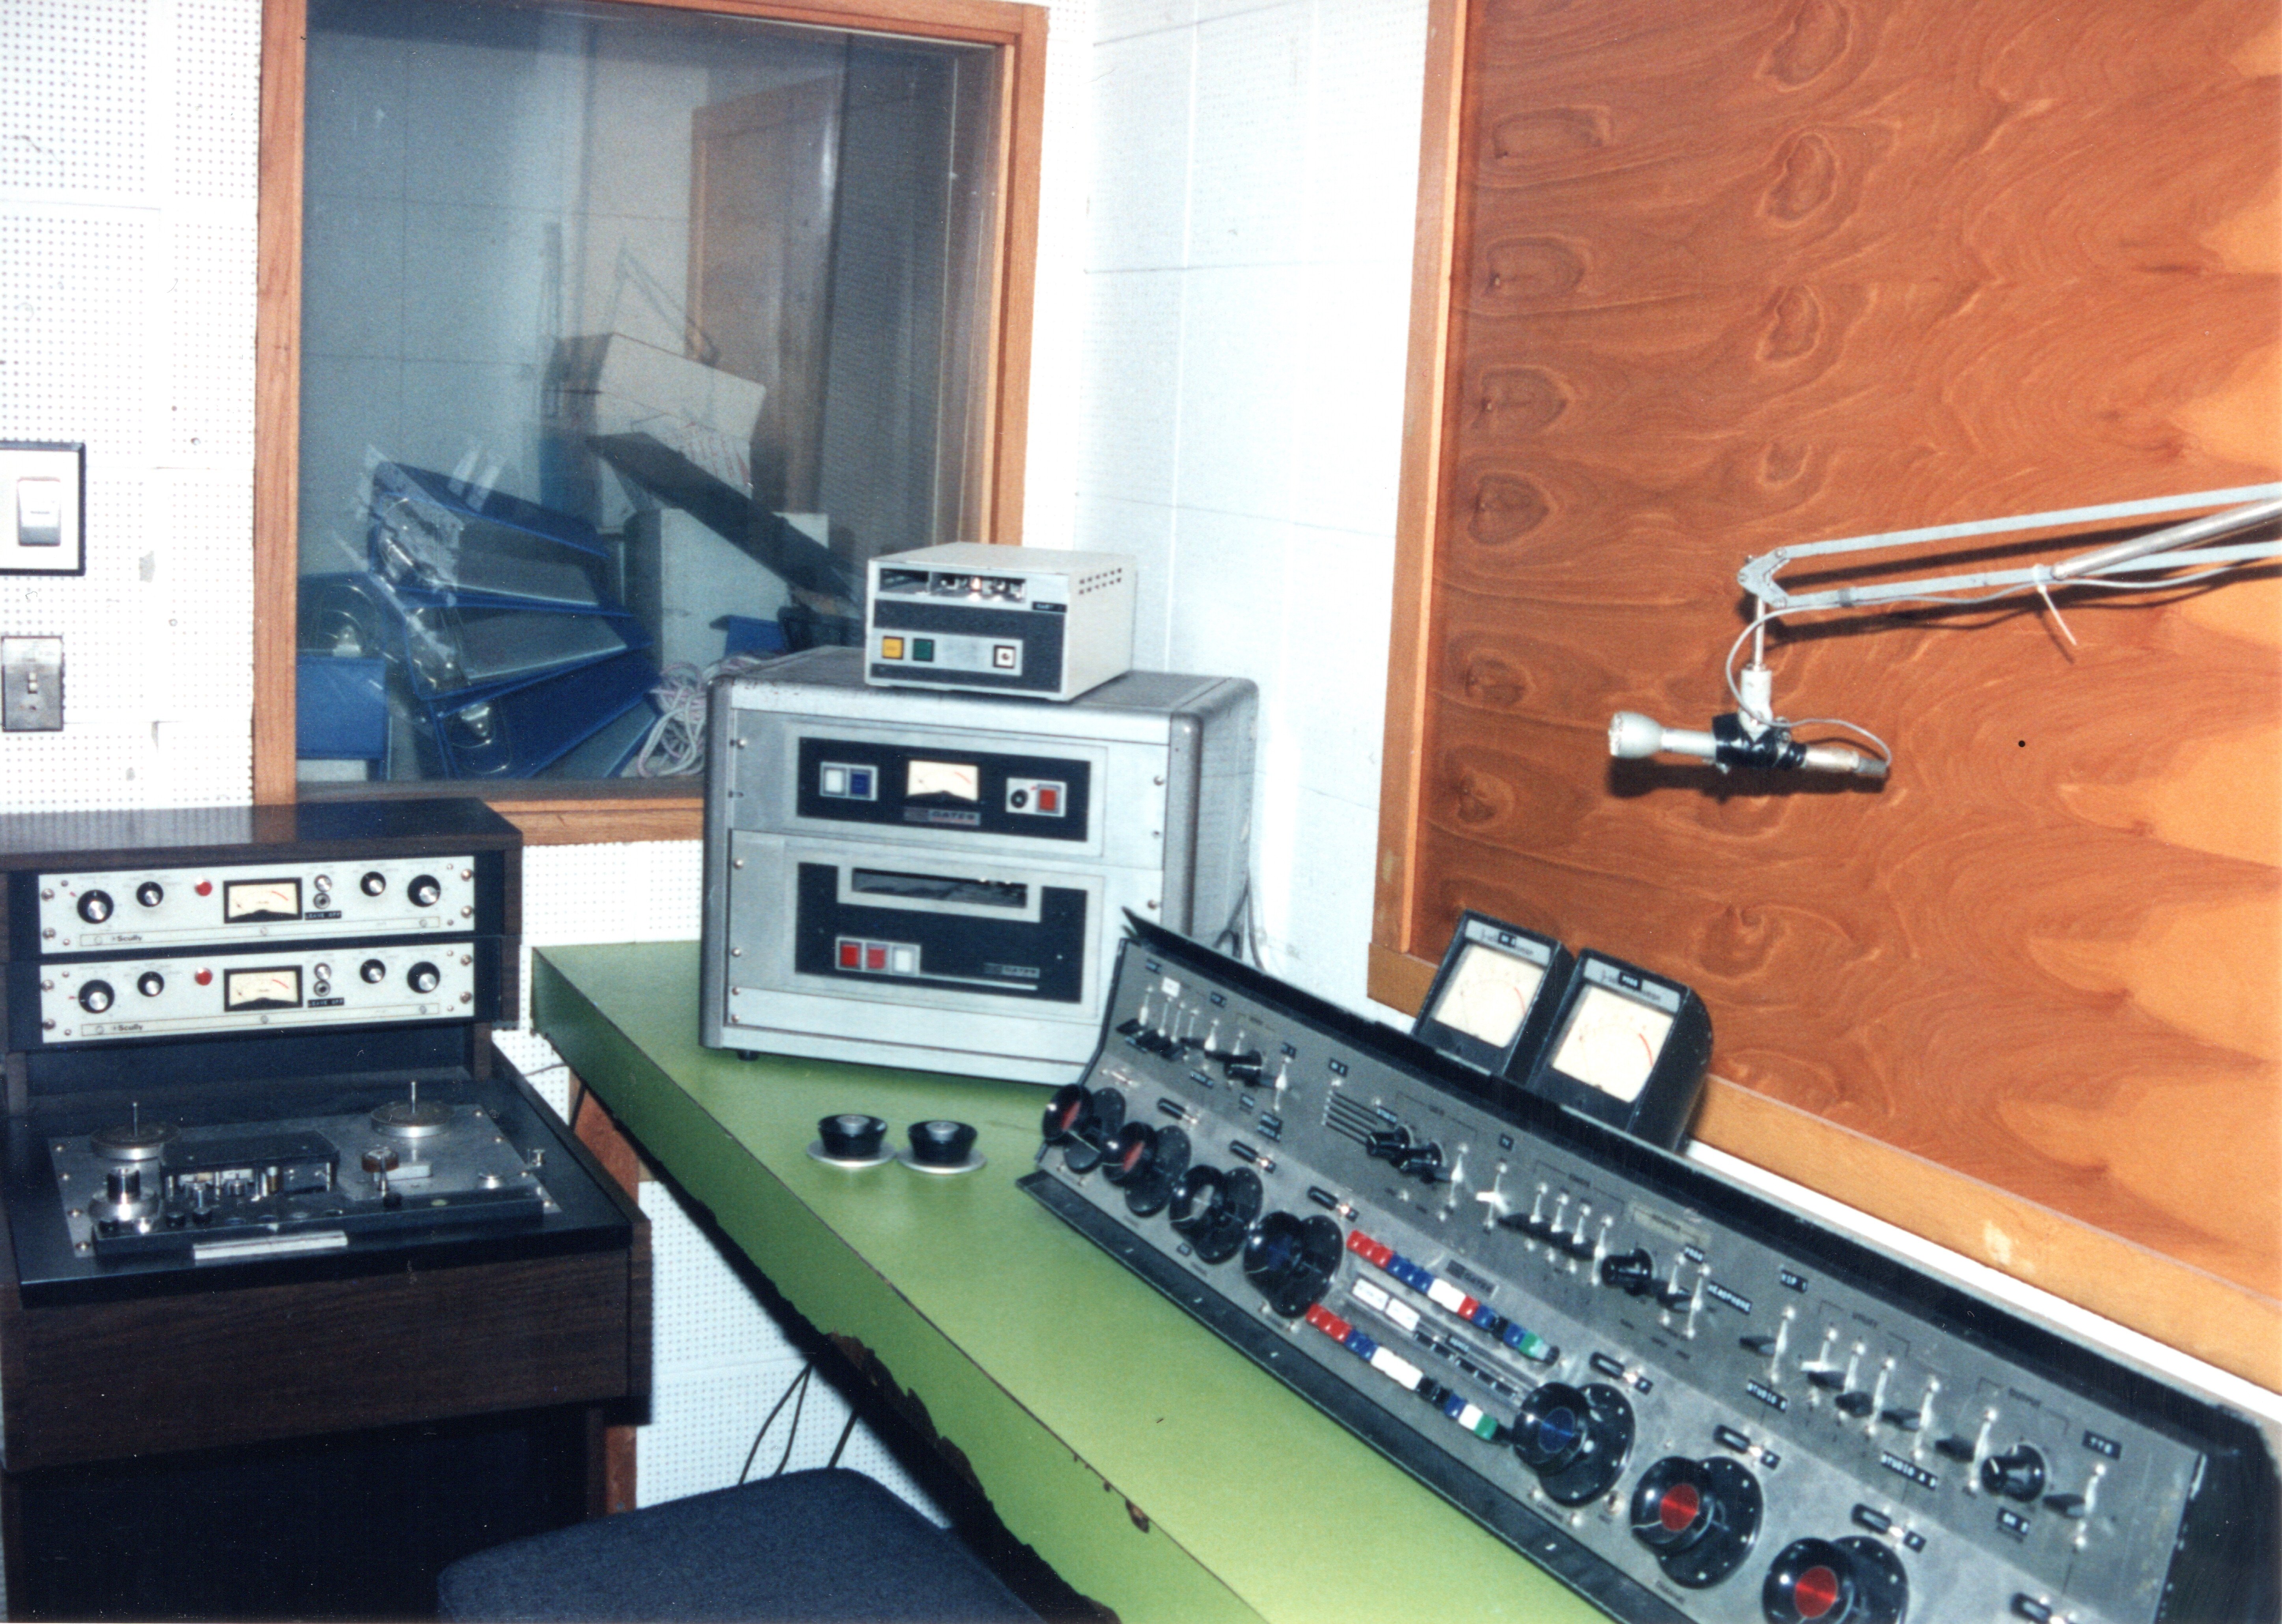 WRSU Studio B - By the 1990s, it was beaten down and needed work. College Students have a tendency not to take care of much.